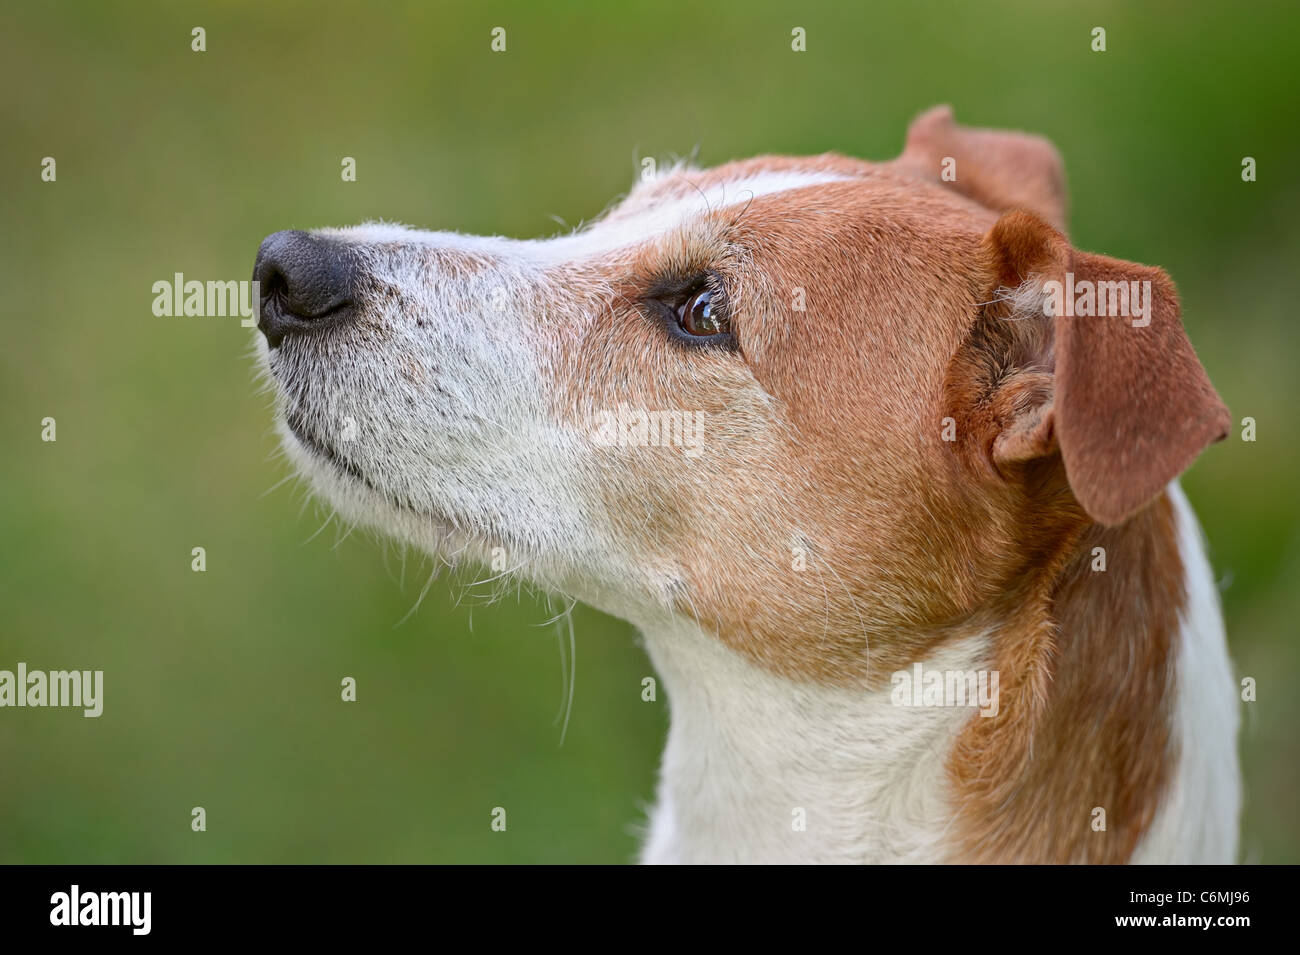 Smooth coated Parson Jack Russell Terrier looking up Stock Photo